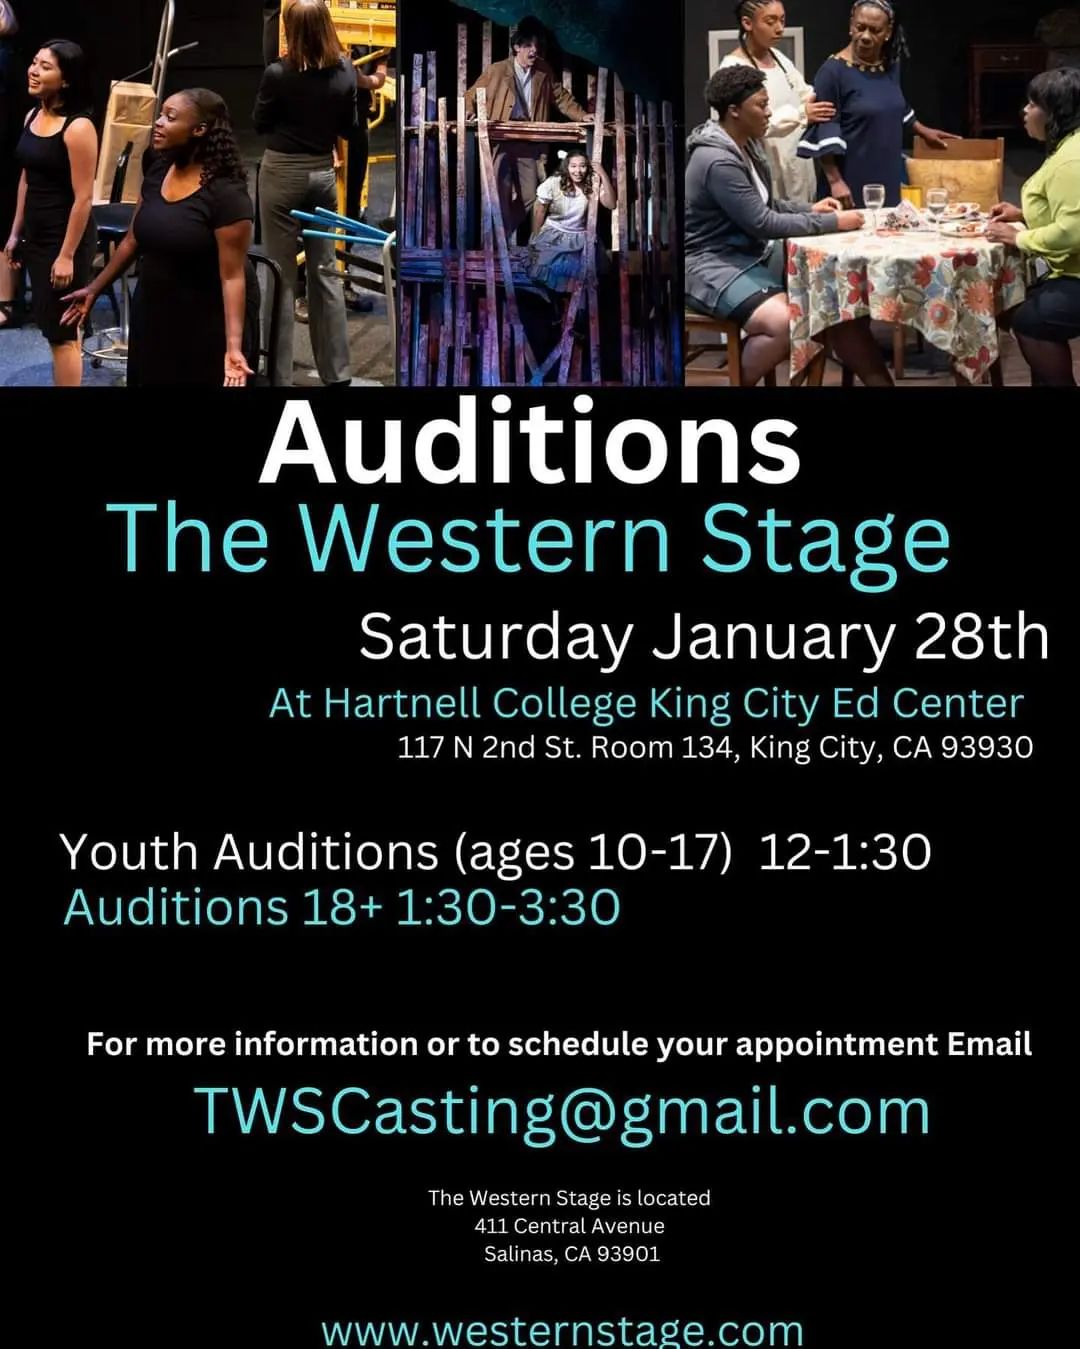 The Western Stage is holding community auditions in King City! For more info and to sign up - twscasting@gmail.com and 
westernstage/auditions.com